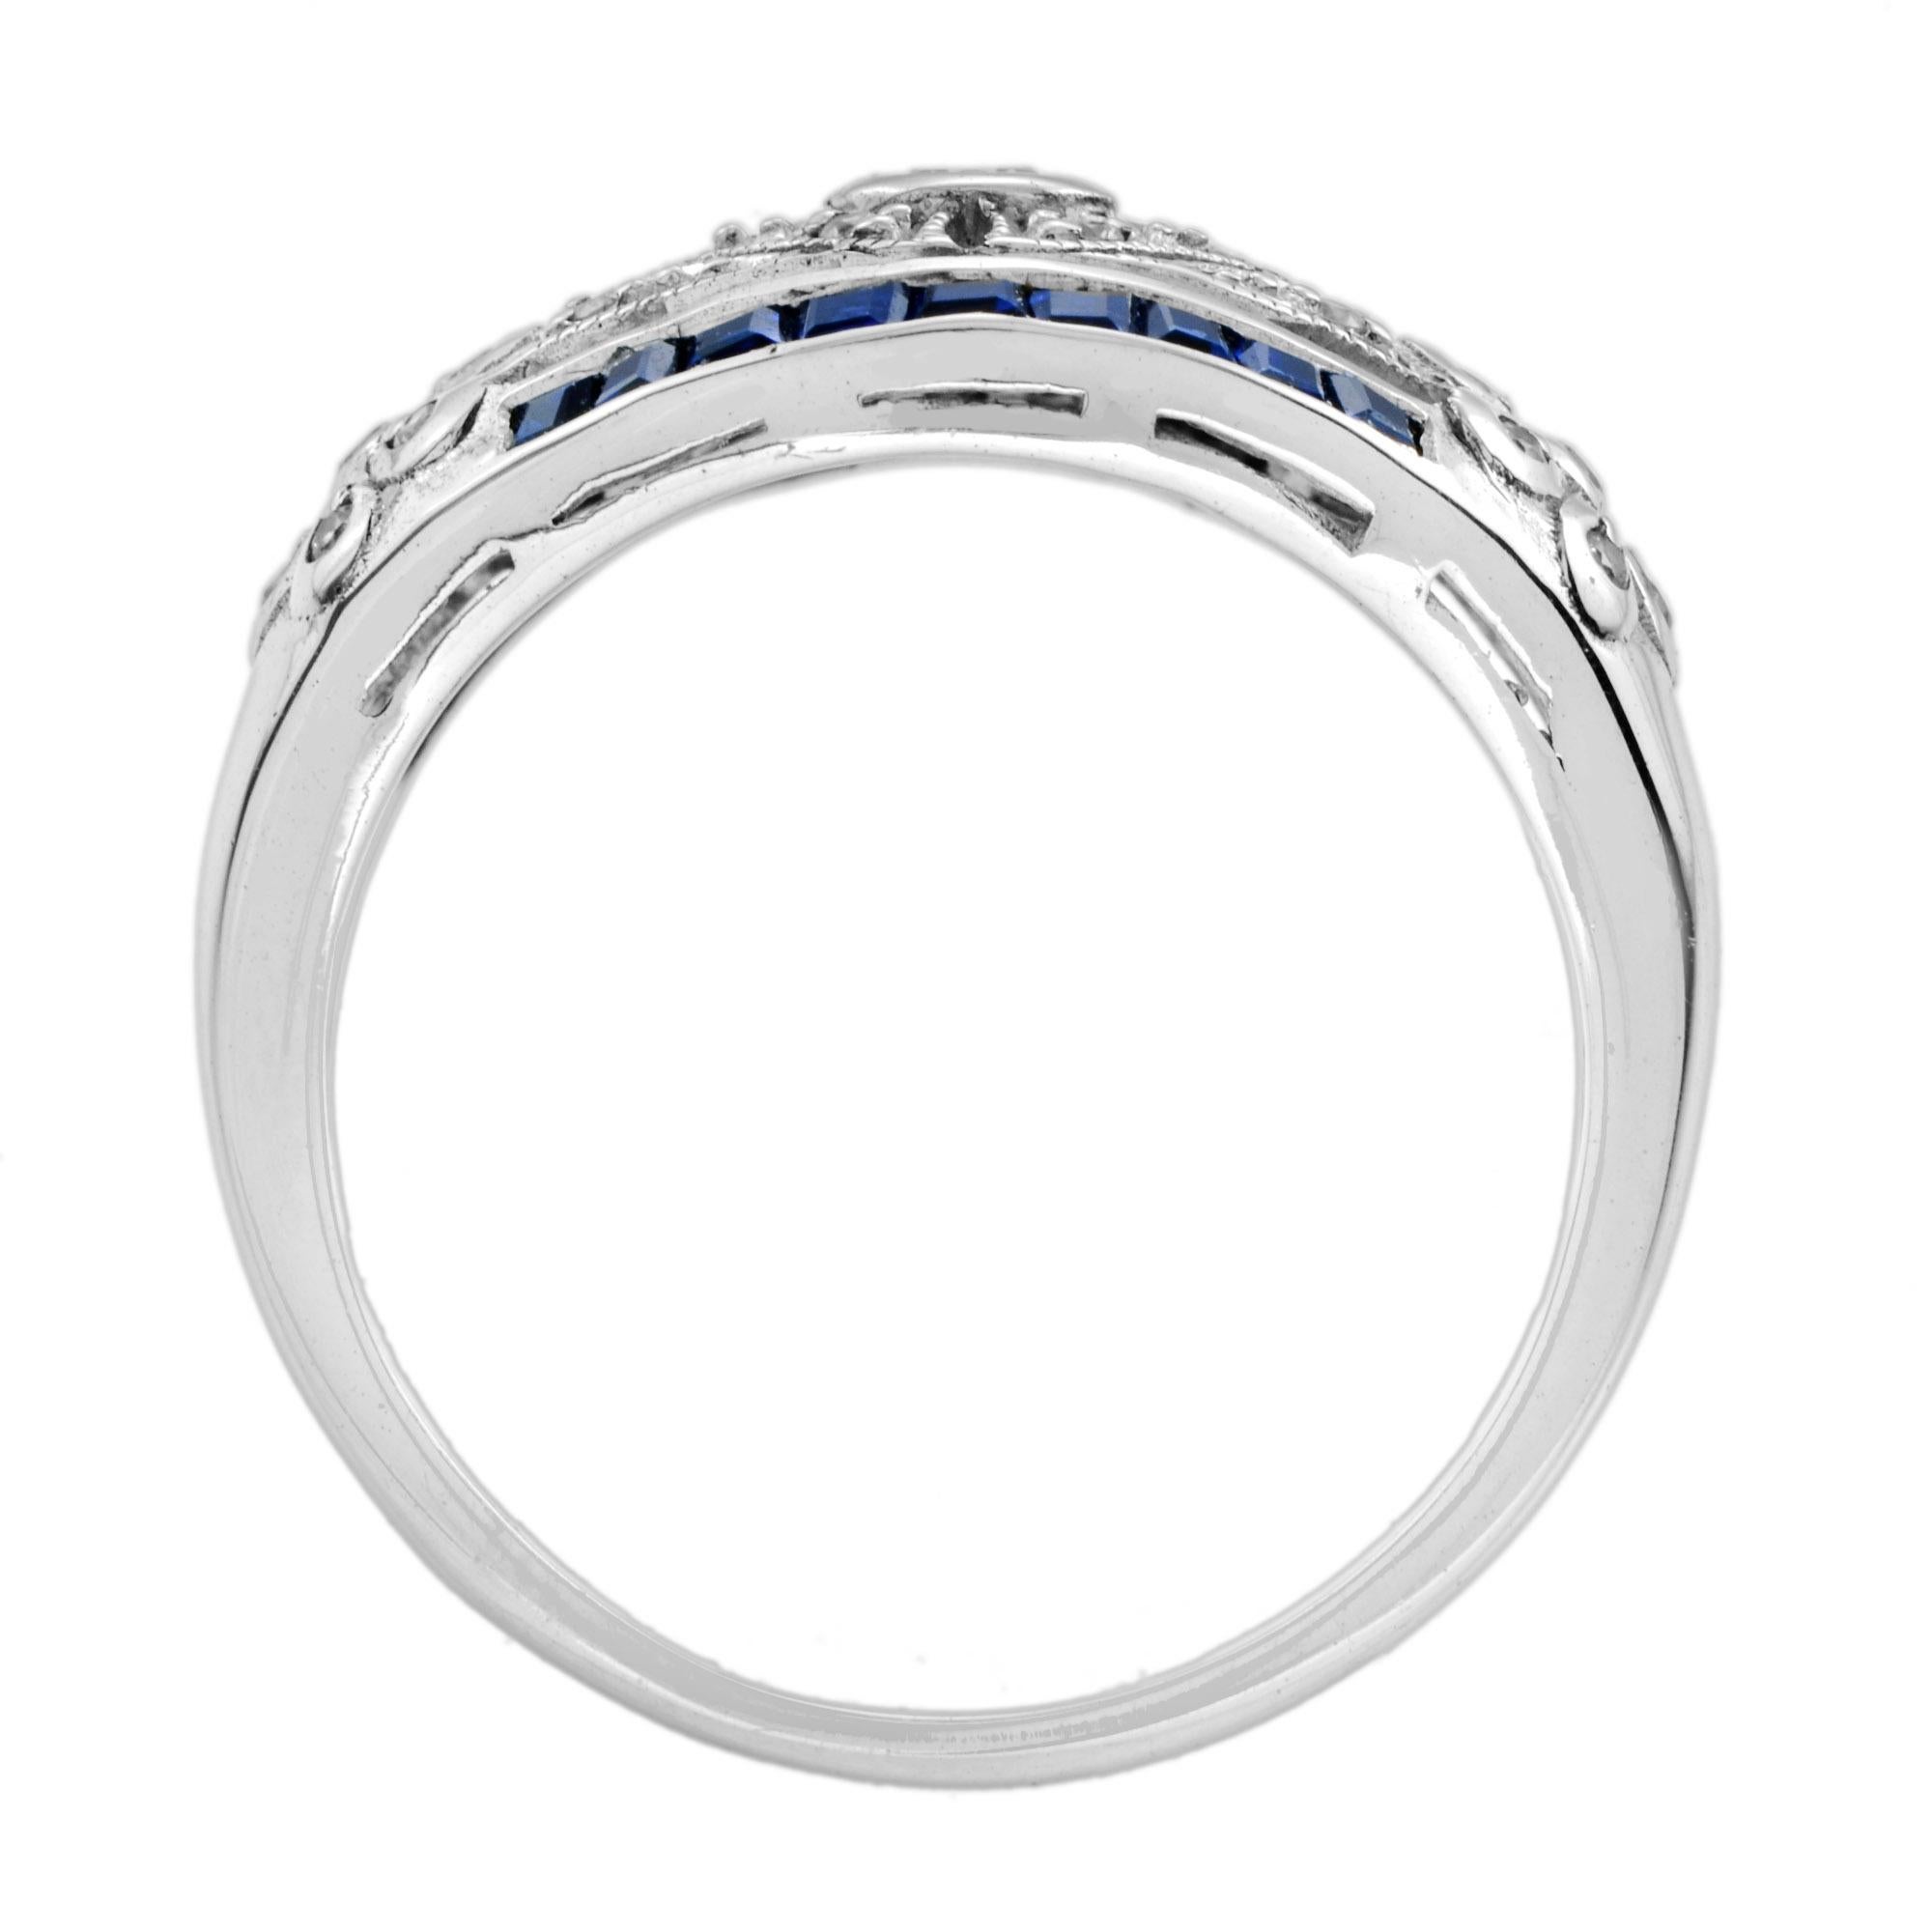 For Sale:  Art Deco Style Diamond and Sapphire Ring in 14K White Gold 6